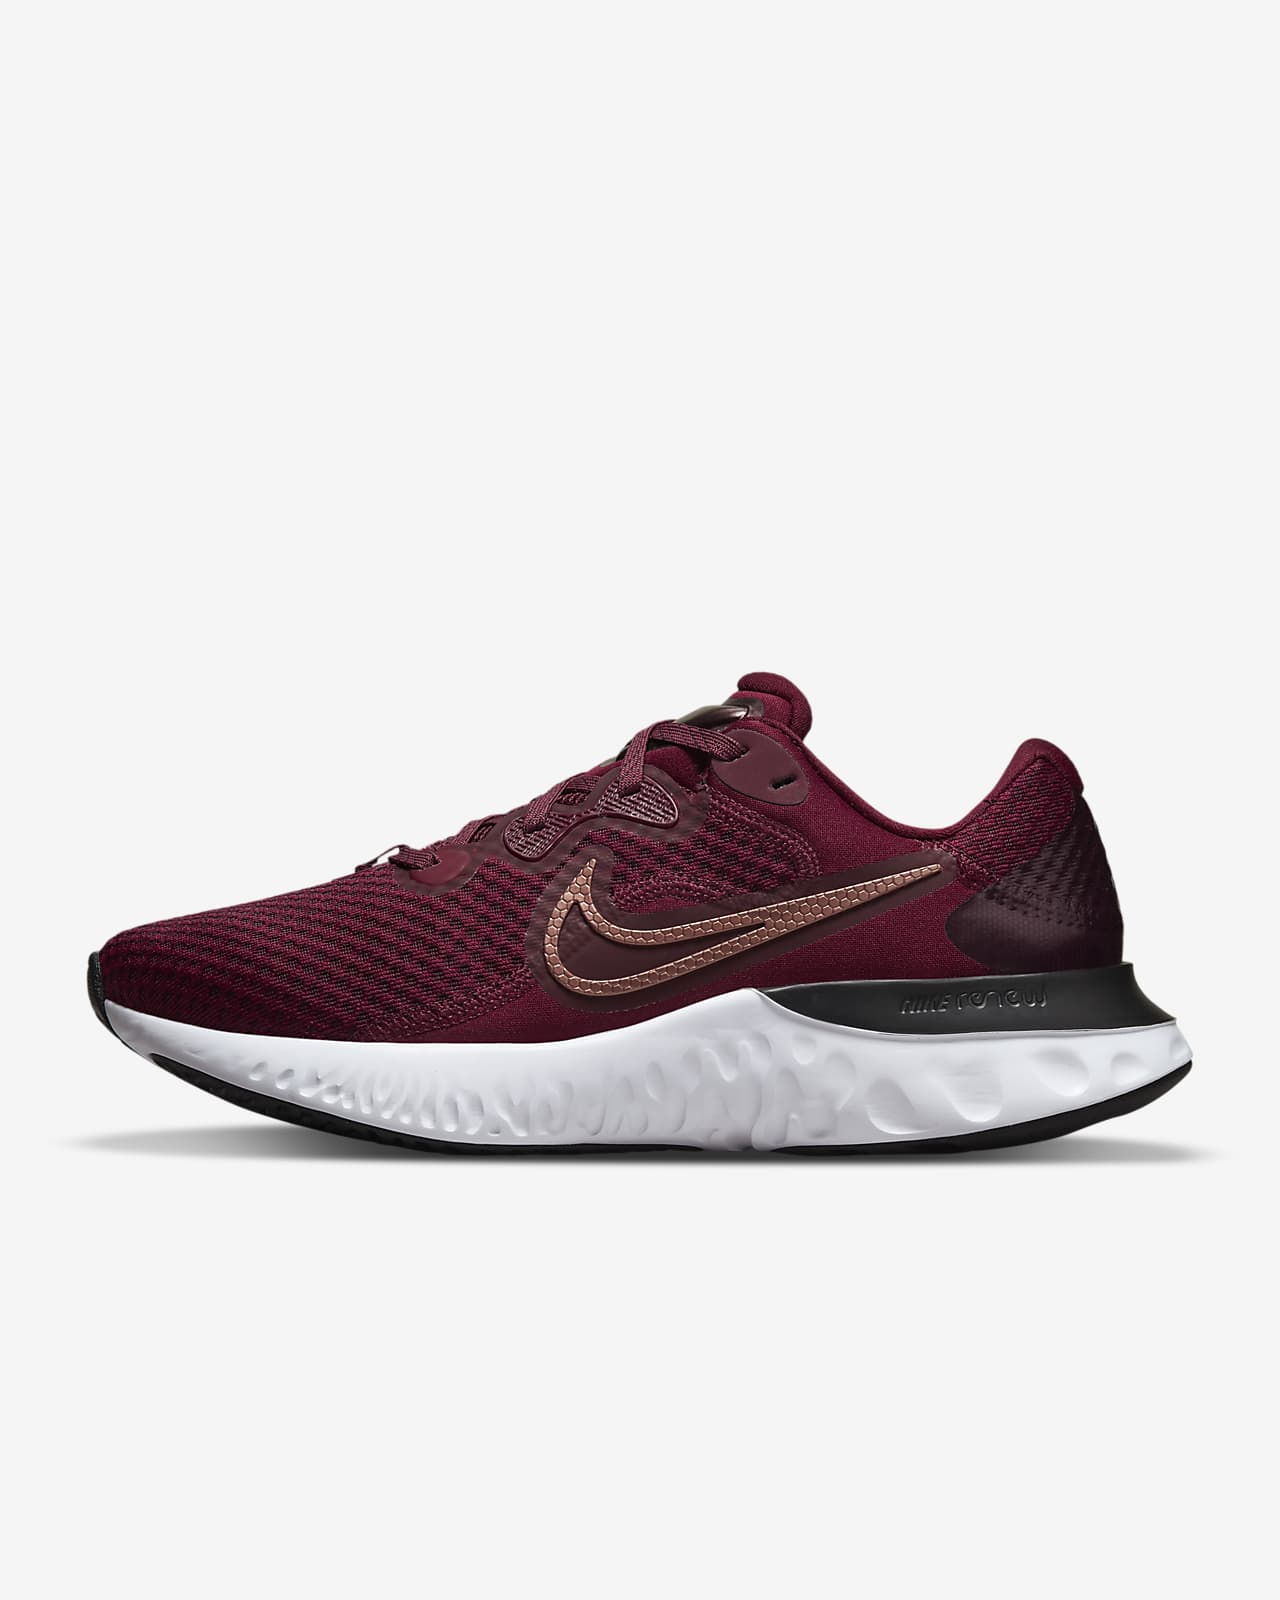 maroon and grey shoes